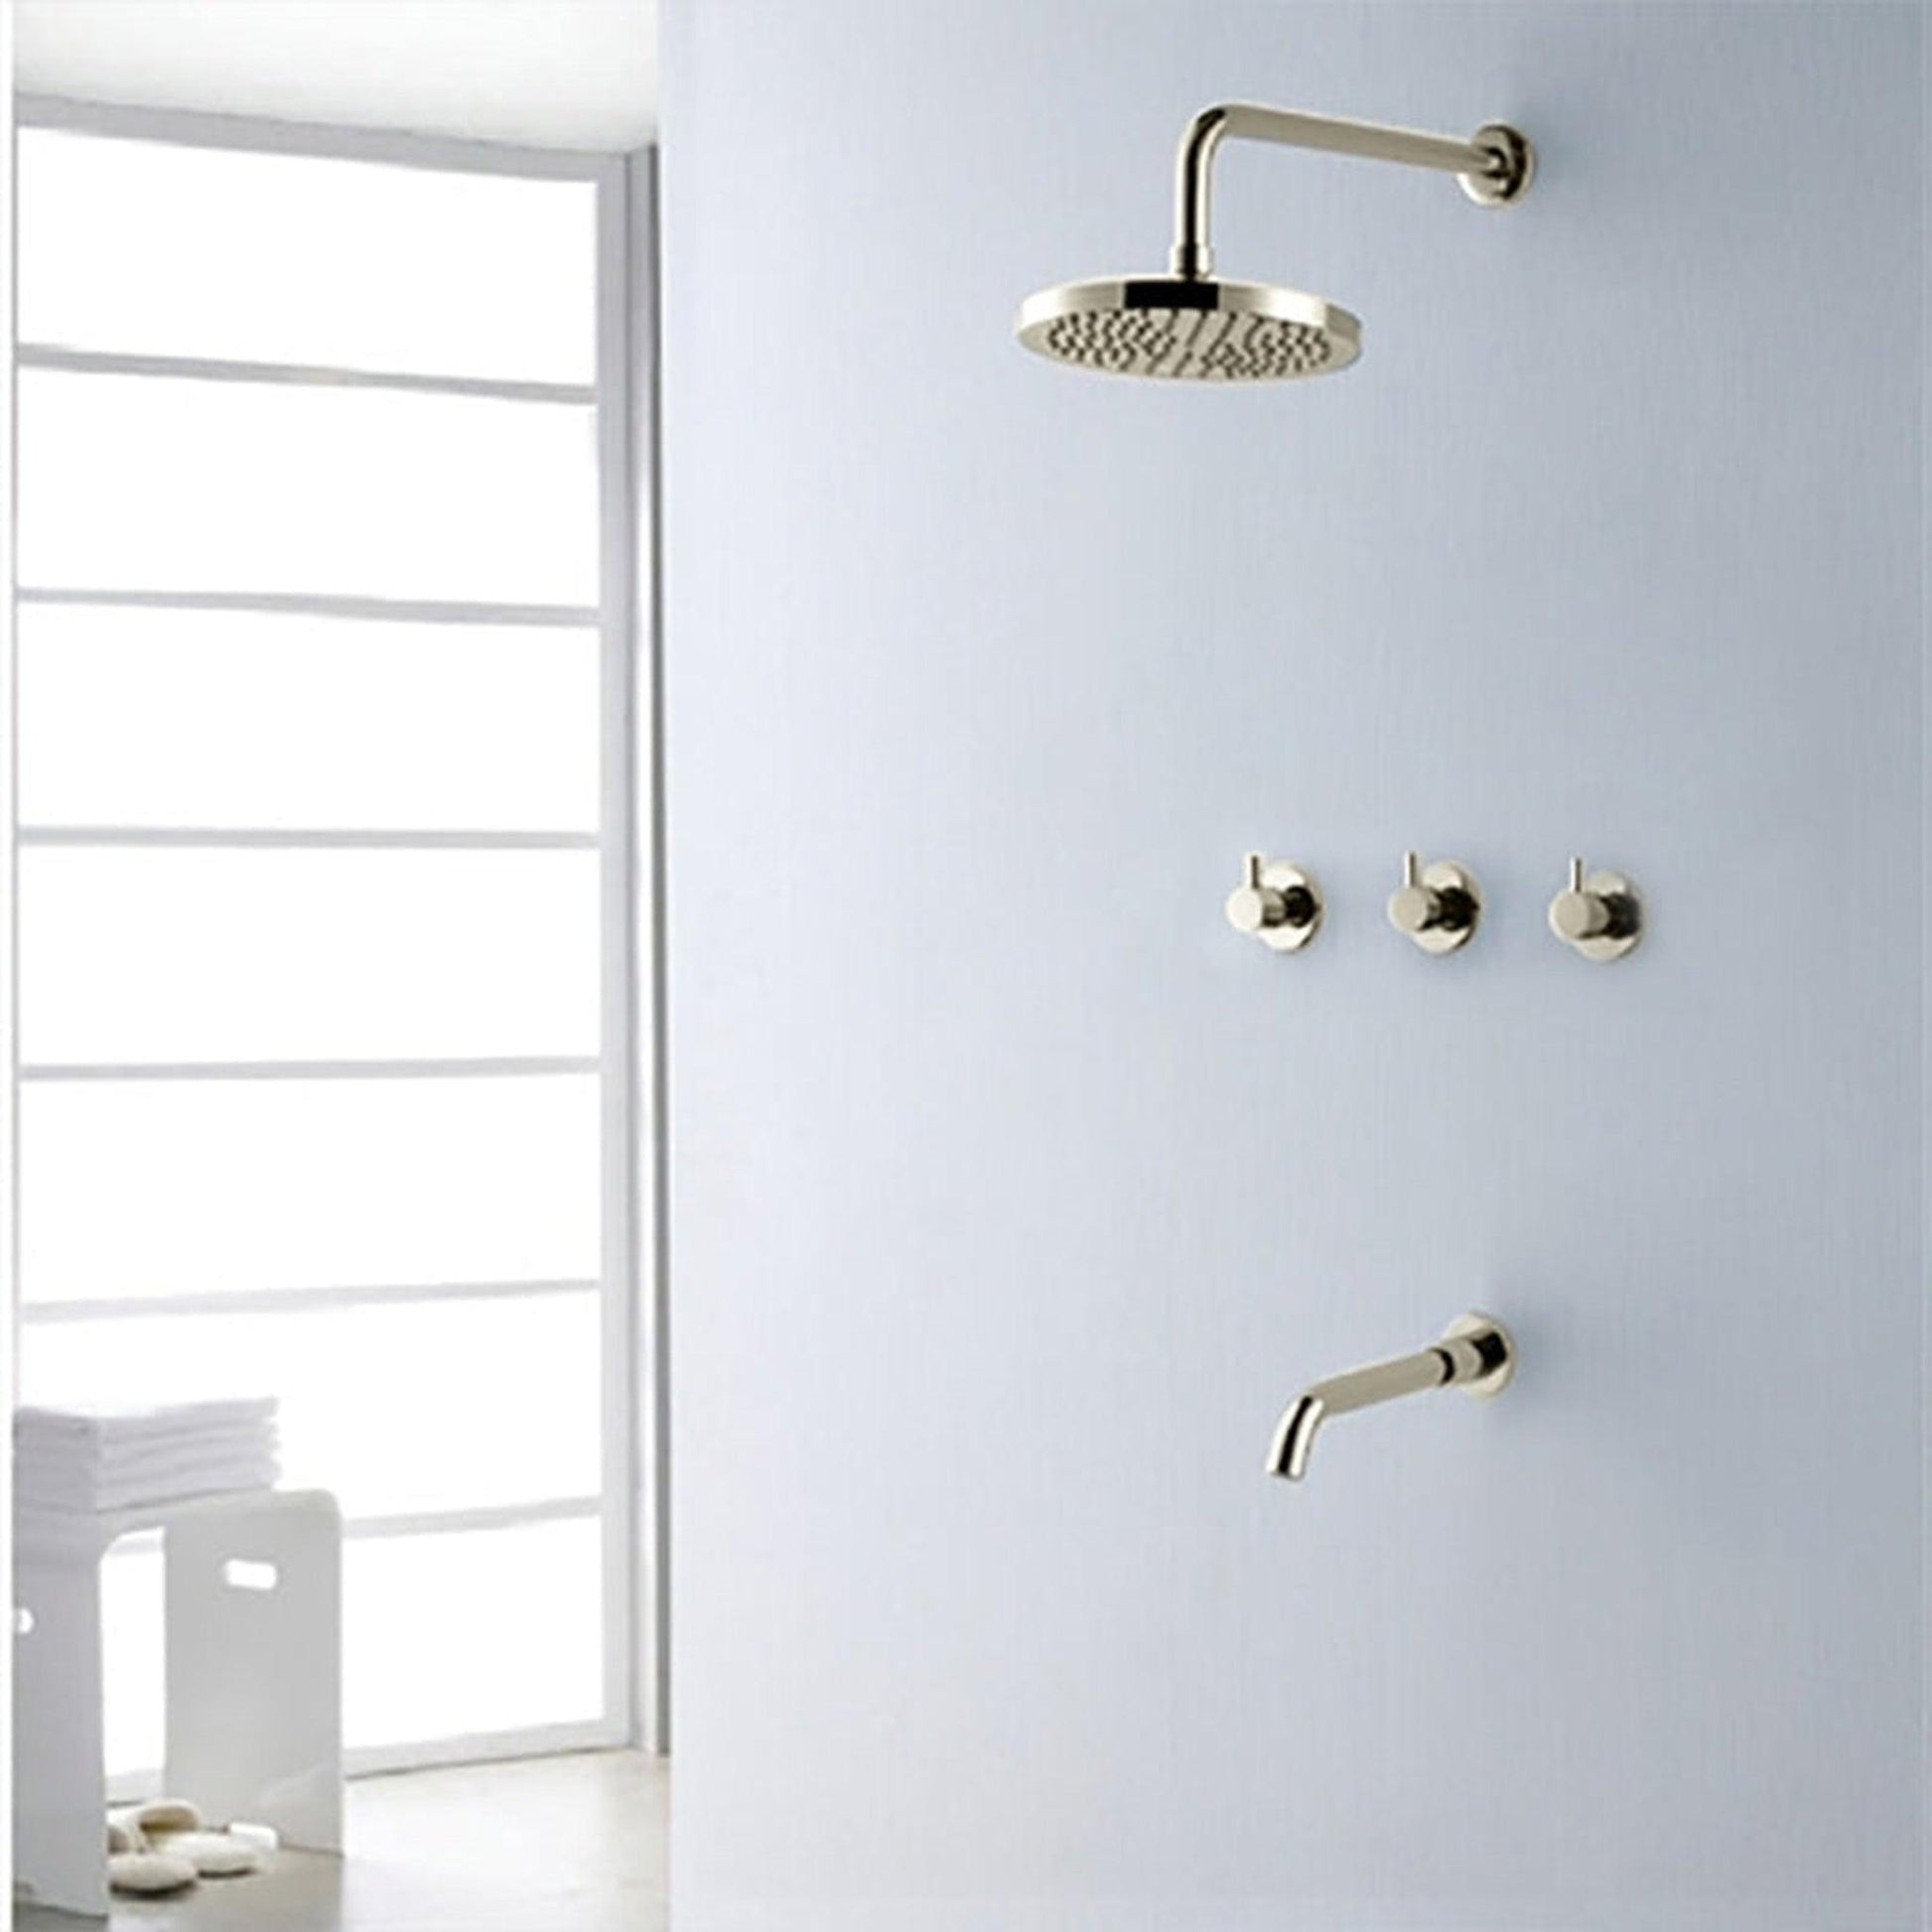 Fontana Oceana 8" Brushed Nickel Round Ceiling Mounted Rainfall Shower Head Faucet Set With or Without Water Powered LED Lights